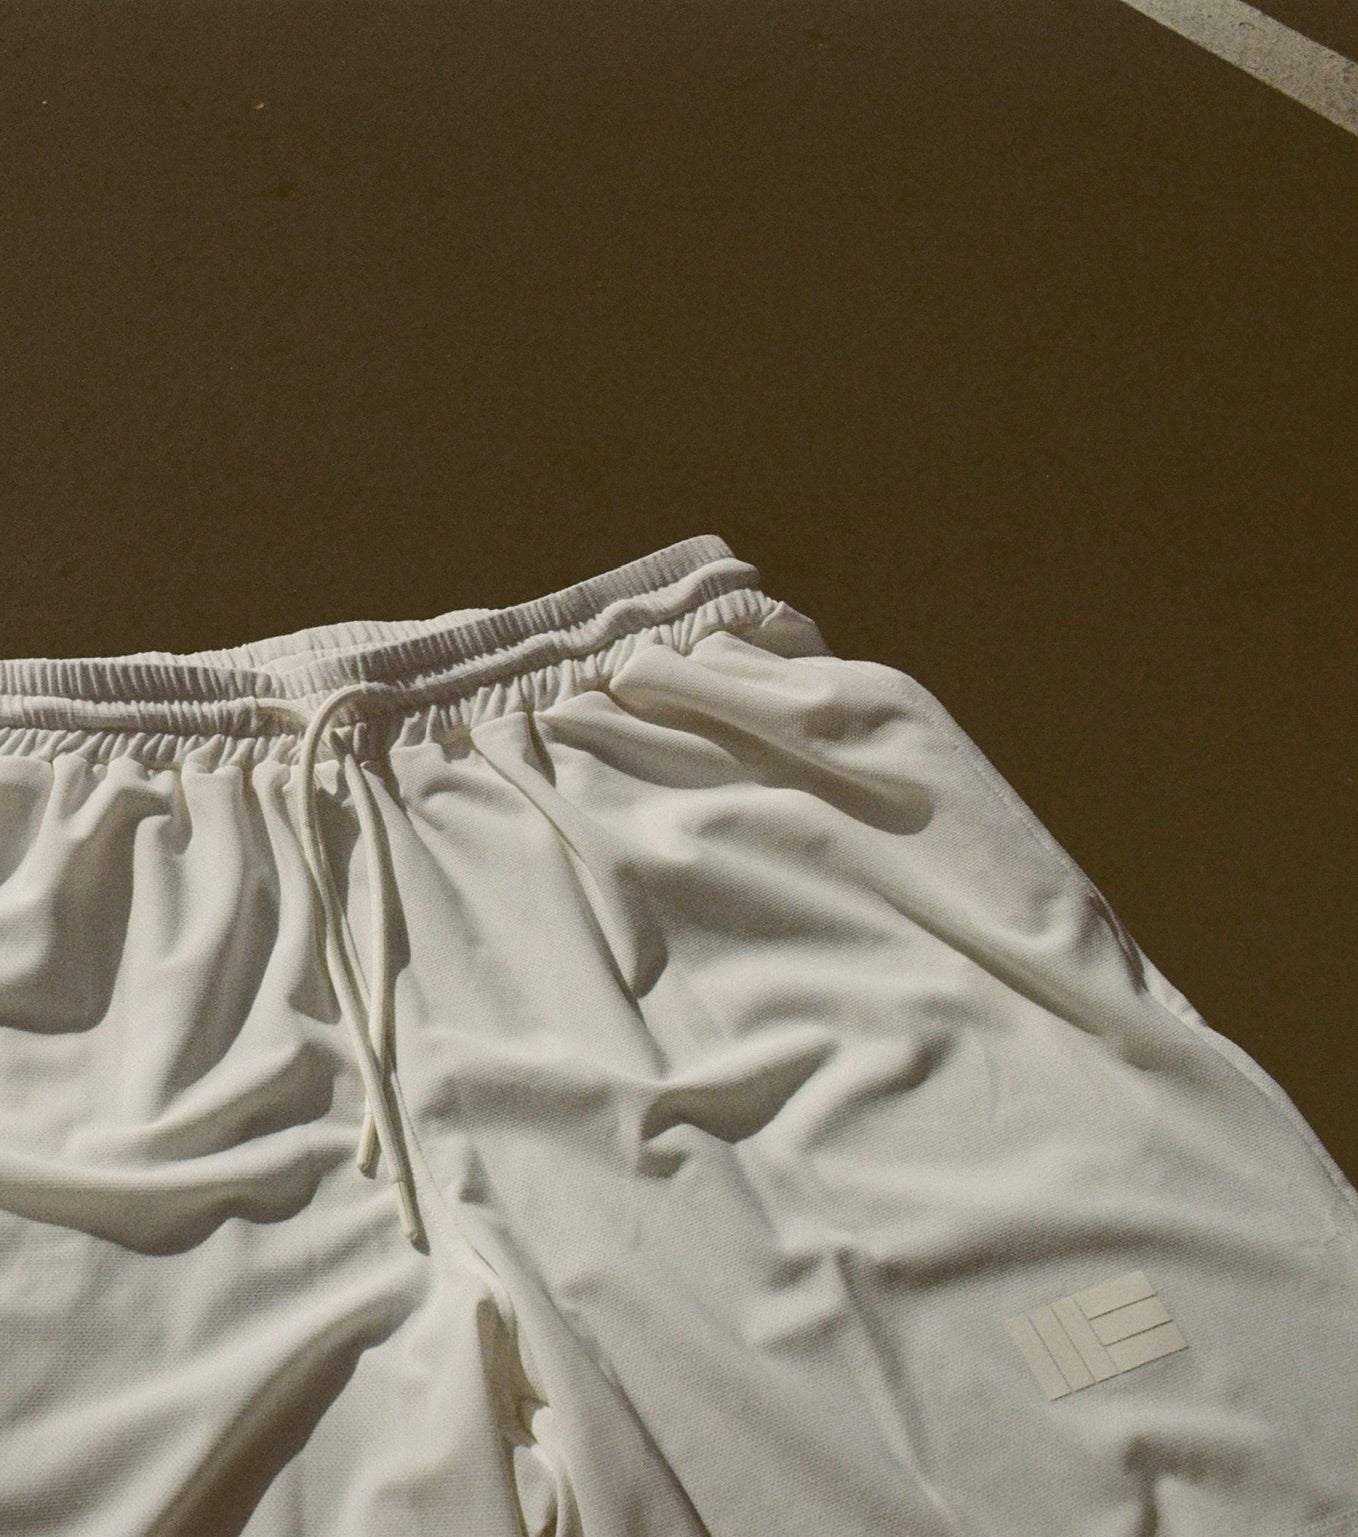 Mens Premium Athletic Sport Shorts Made in NYC - White